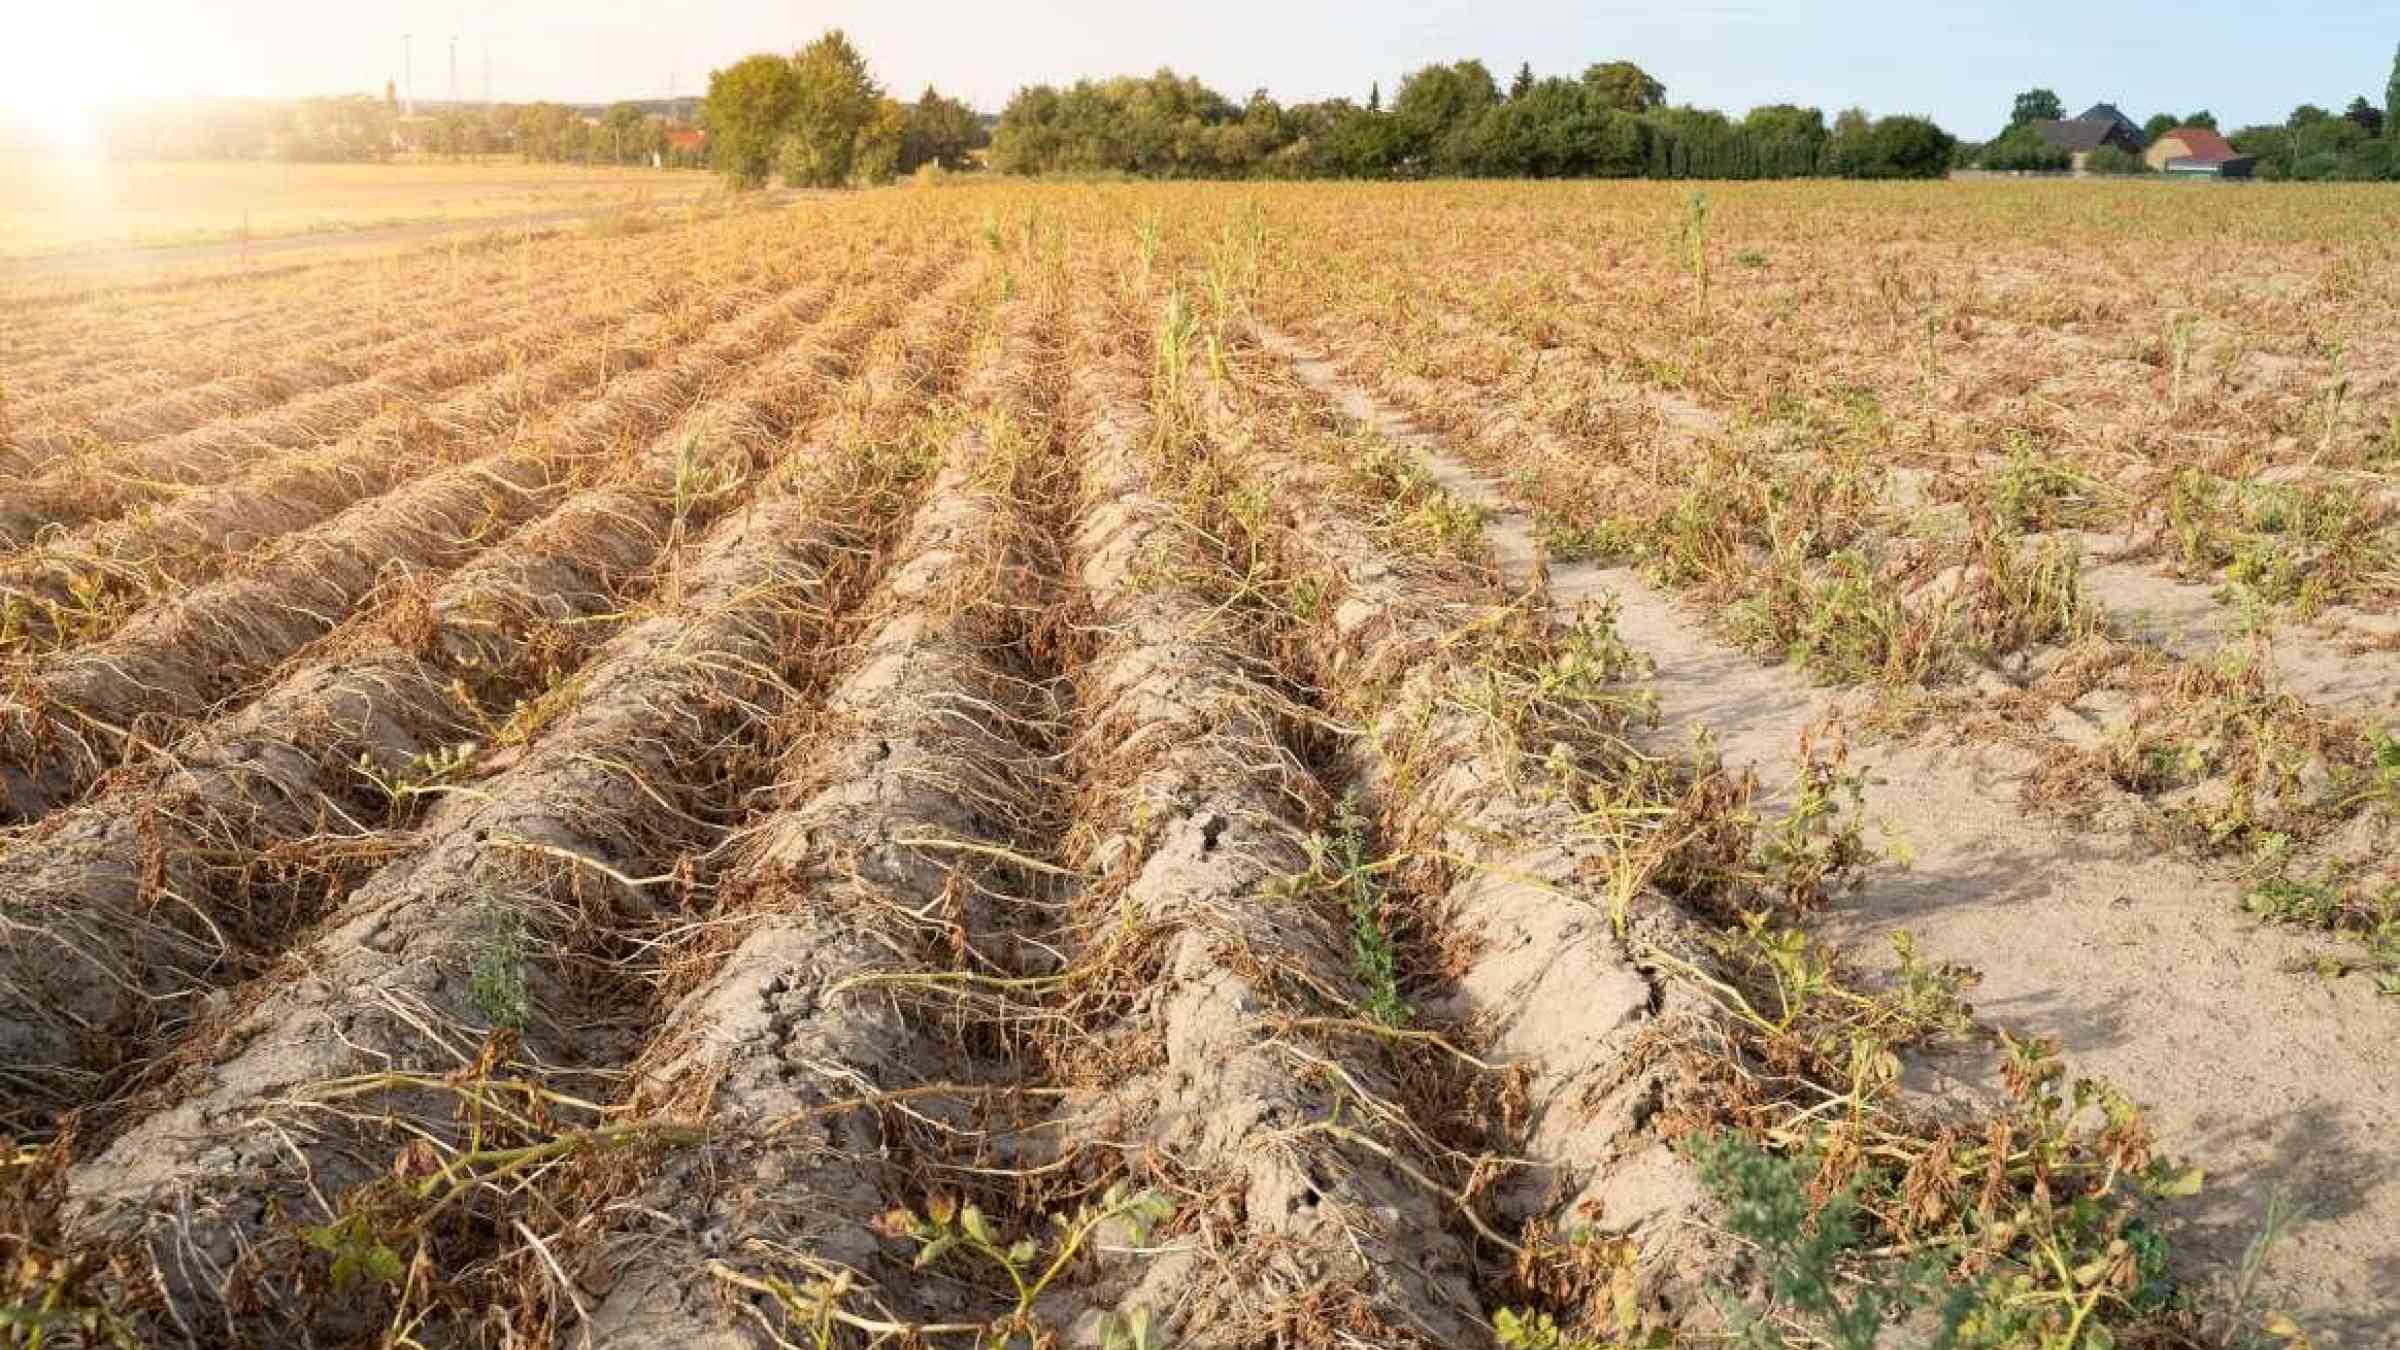 Drought-affected cropland areas across Central Europe will nearly double, including more than 40 million hectares of cultivated land. Shutterstock.com